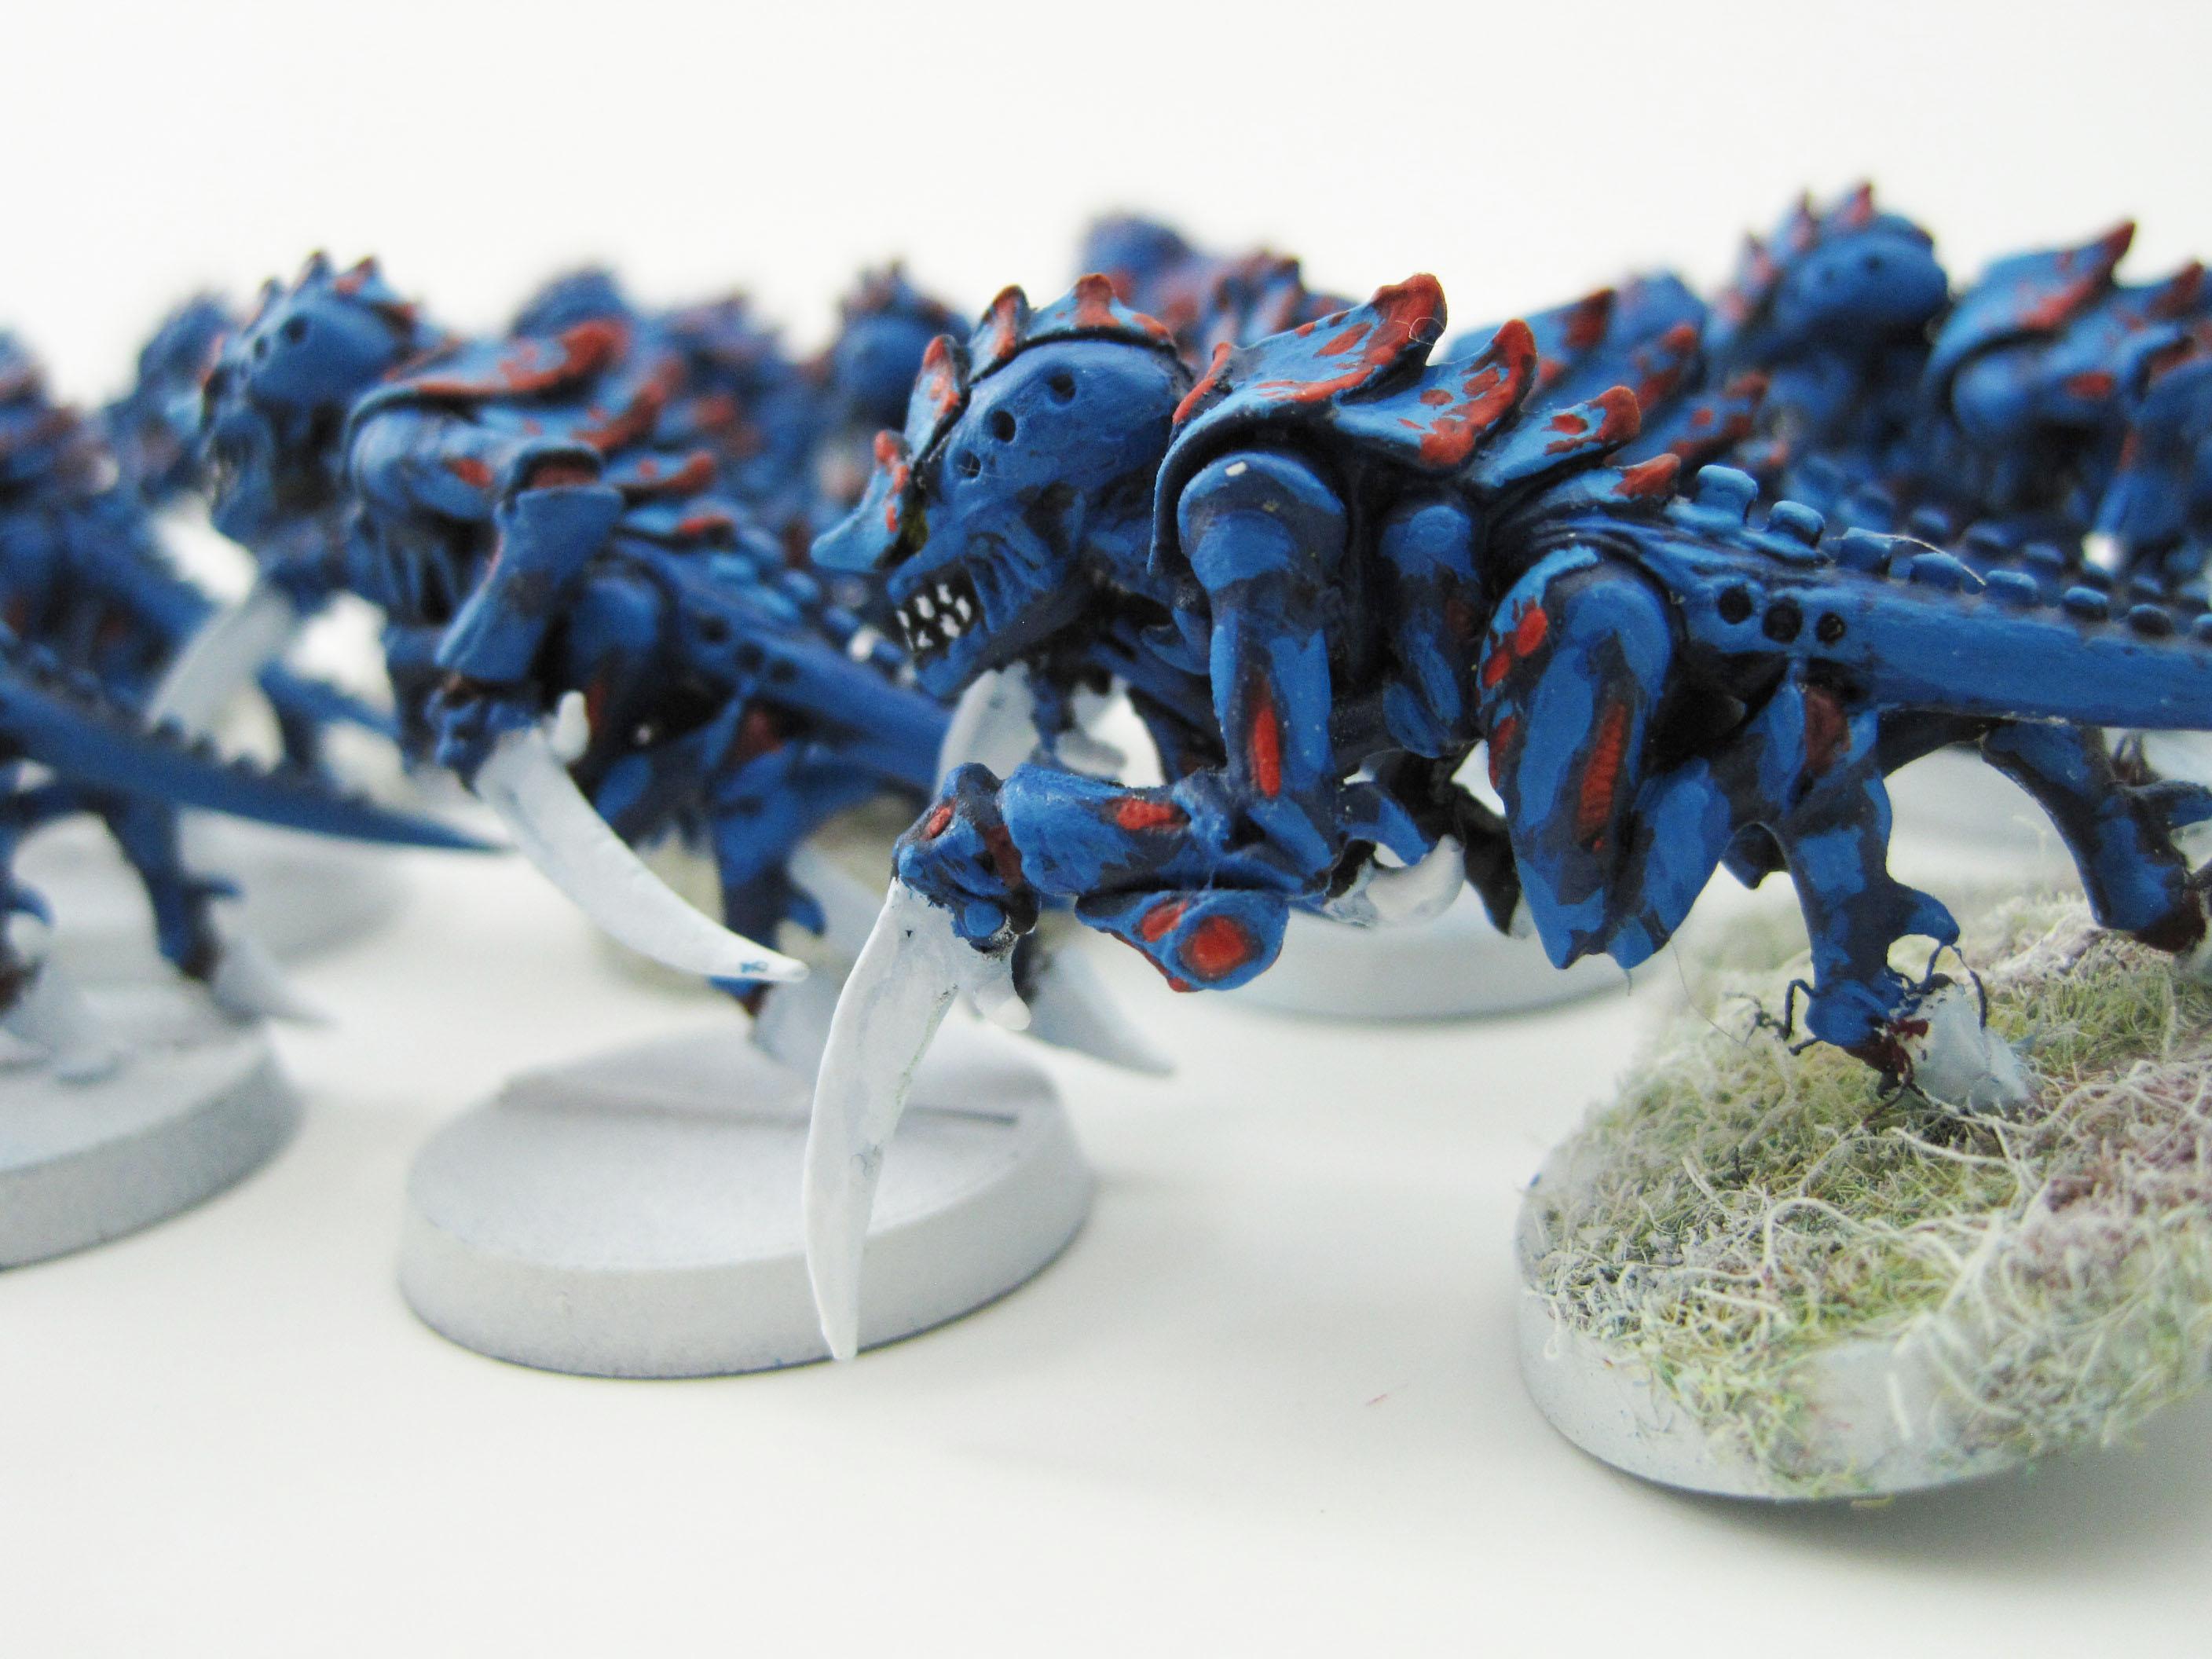 Blue, Hormagaunts, Kyogre, Red Carapace, Red Spots, Spot, Tyranids, White Claws